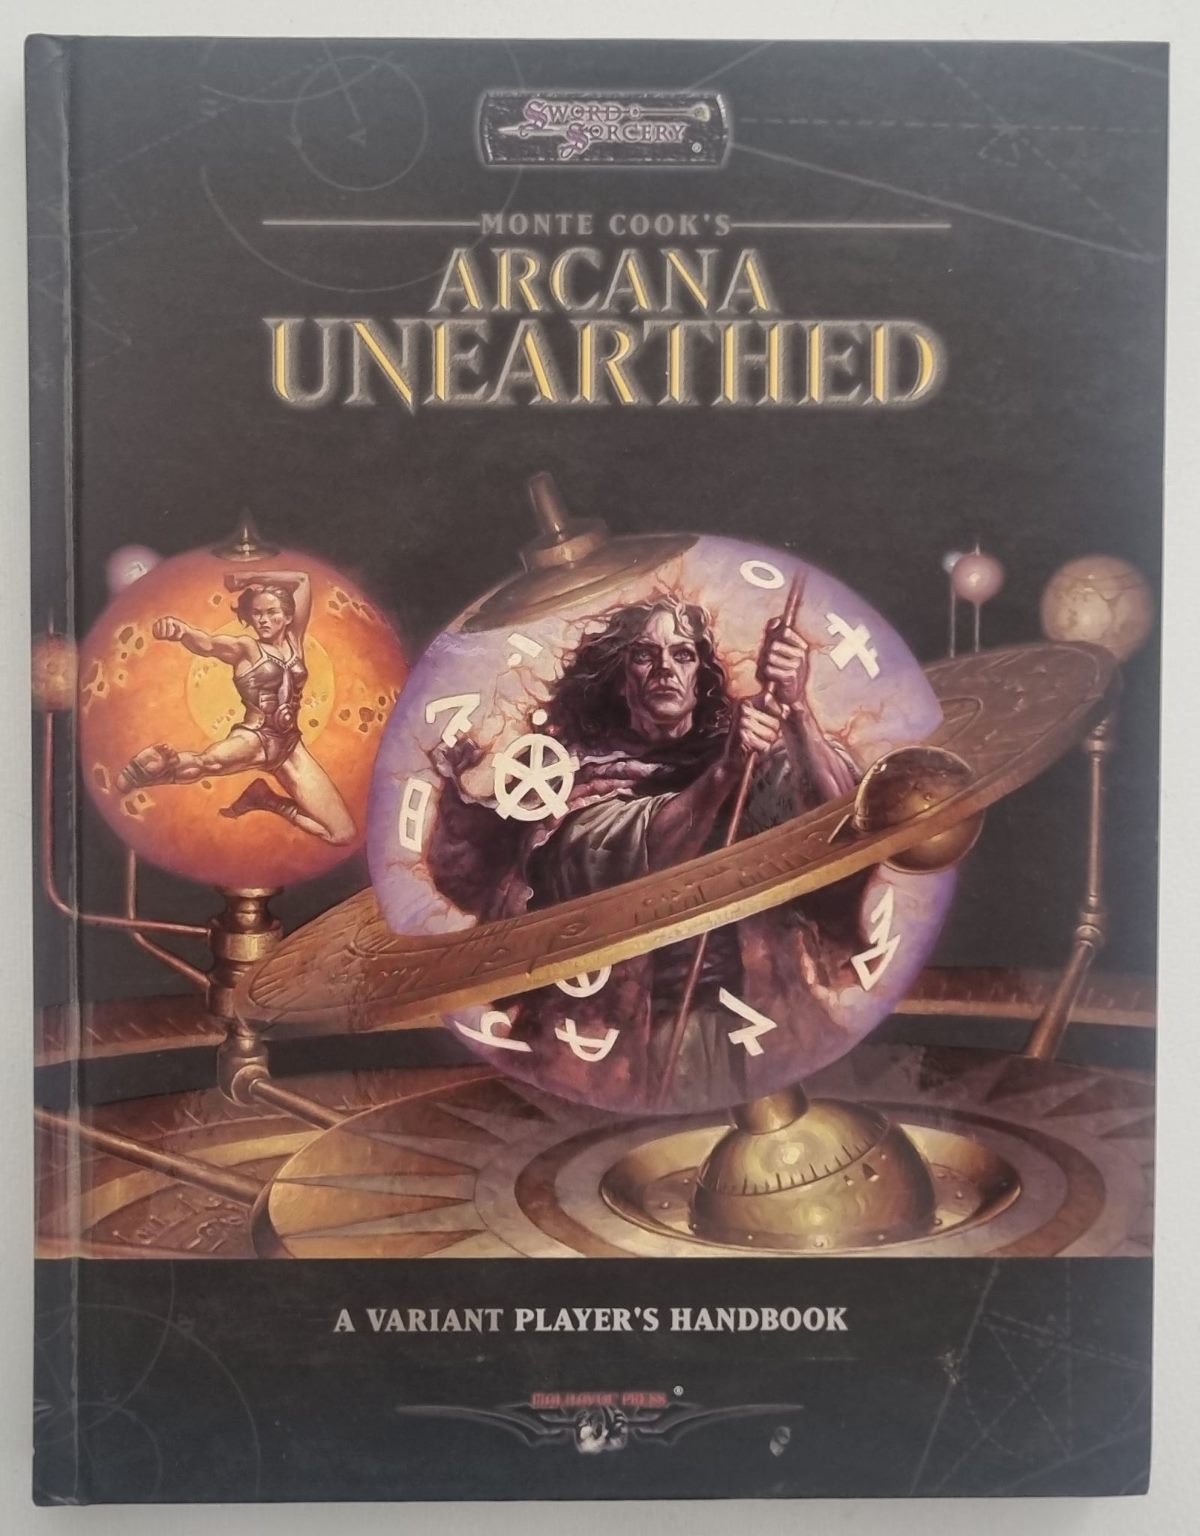 Monte Cook's Arcana Unearthed - A Variant Player's Handbook (Sword & Sorcery)